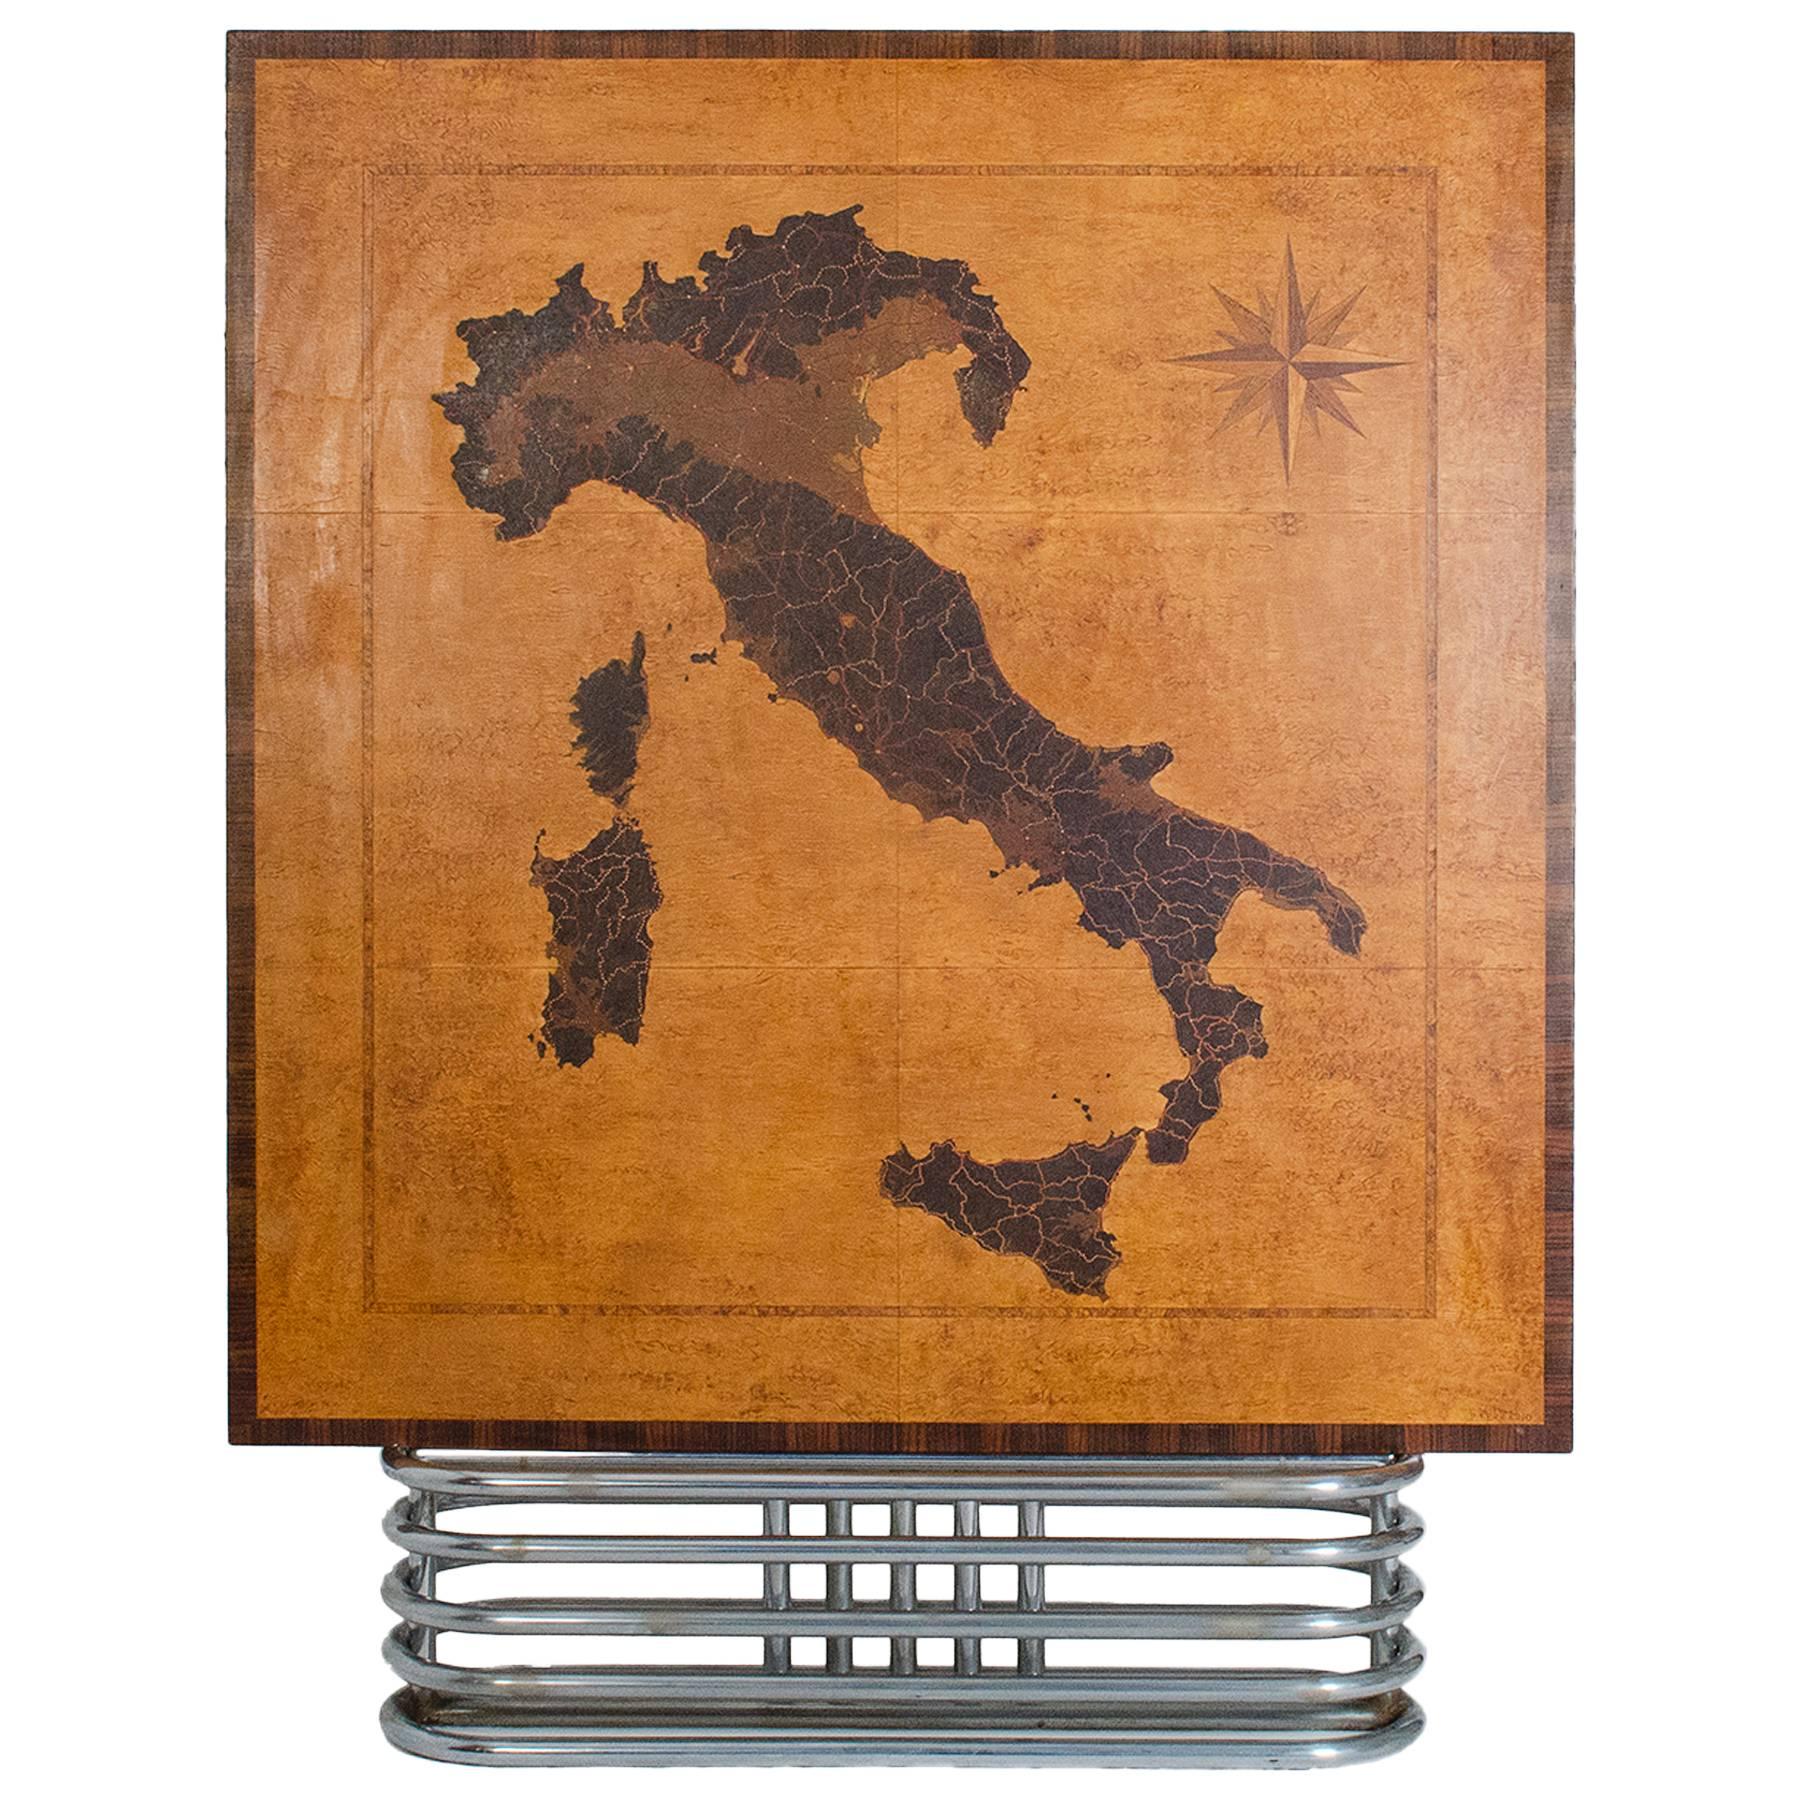 Extraordinary 1930s Inlaid Wood Map of Italy by P. Ferrario for the Touring Club